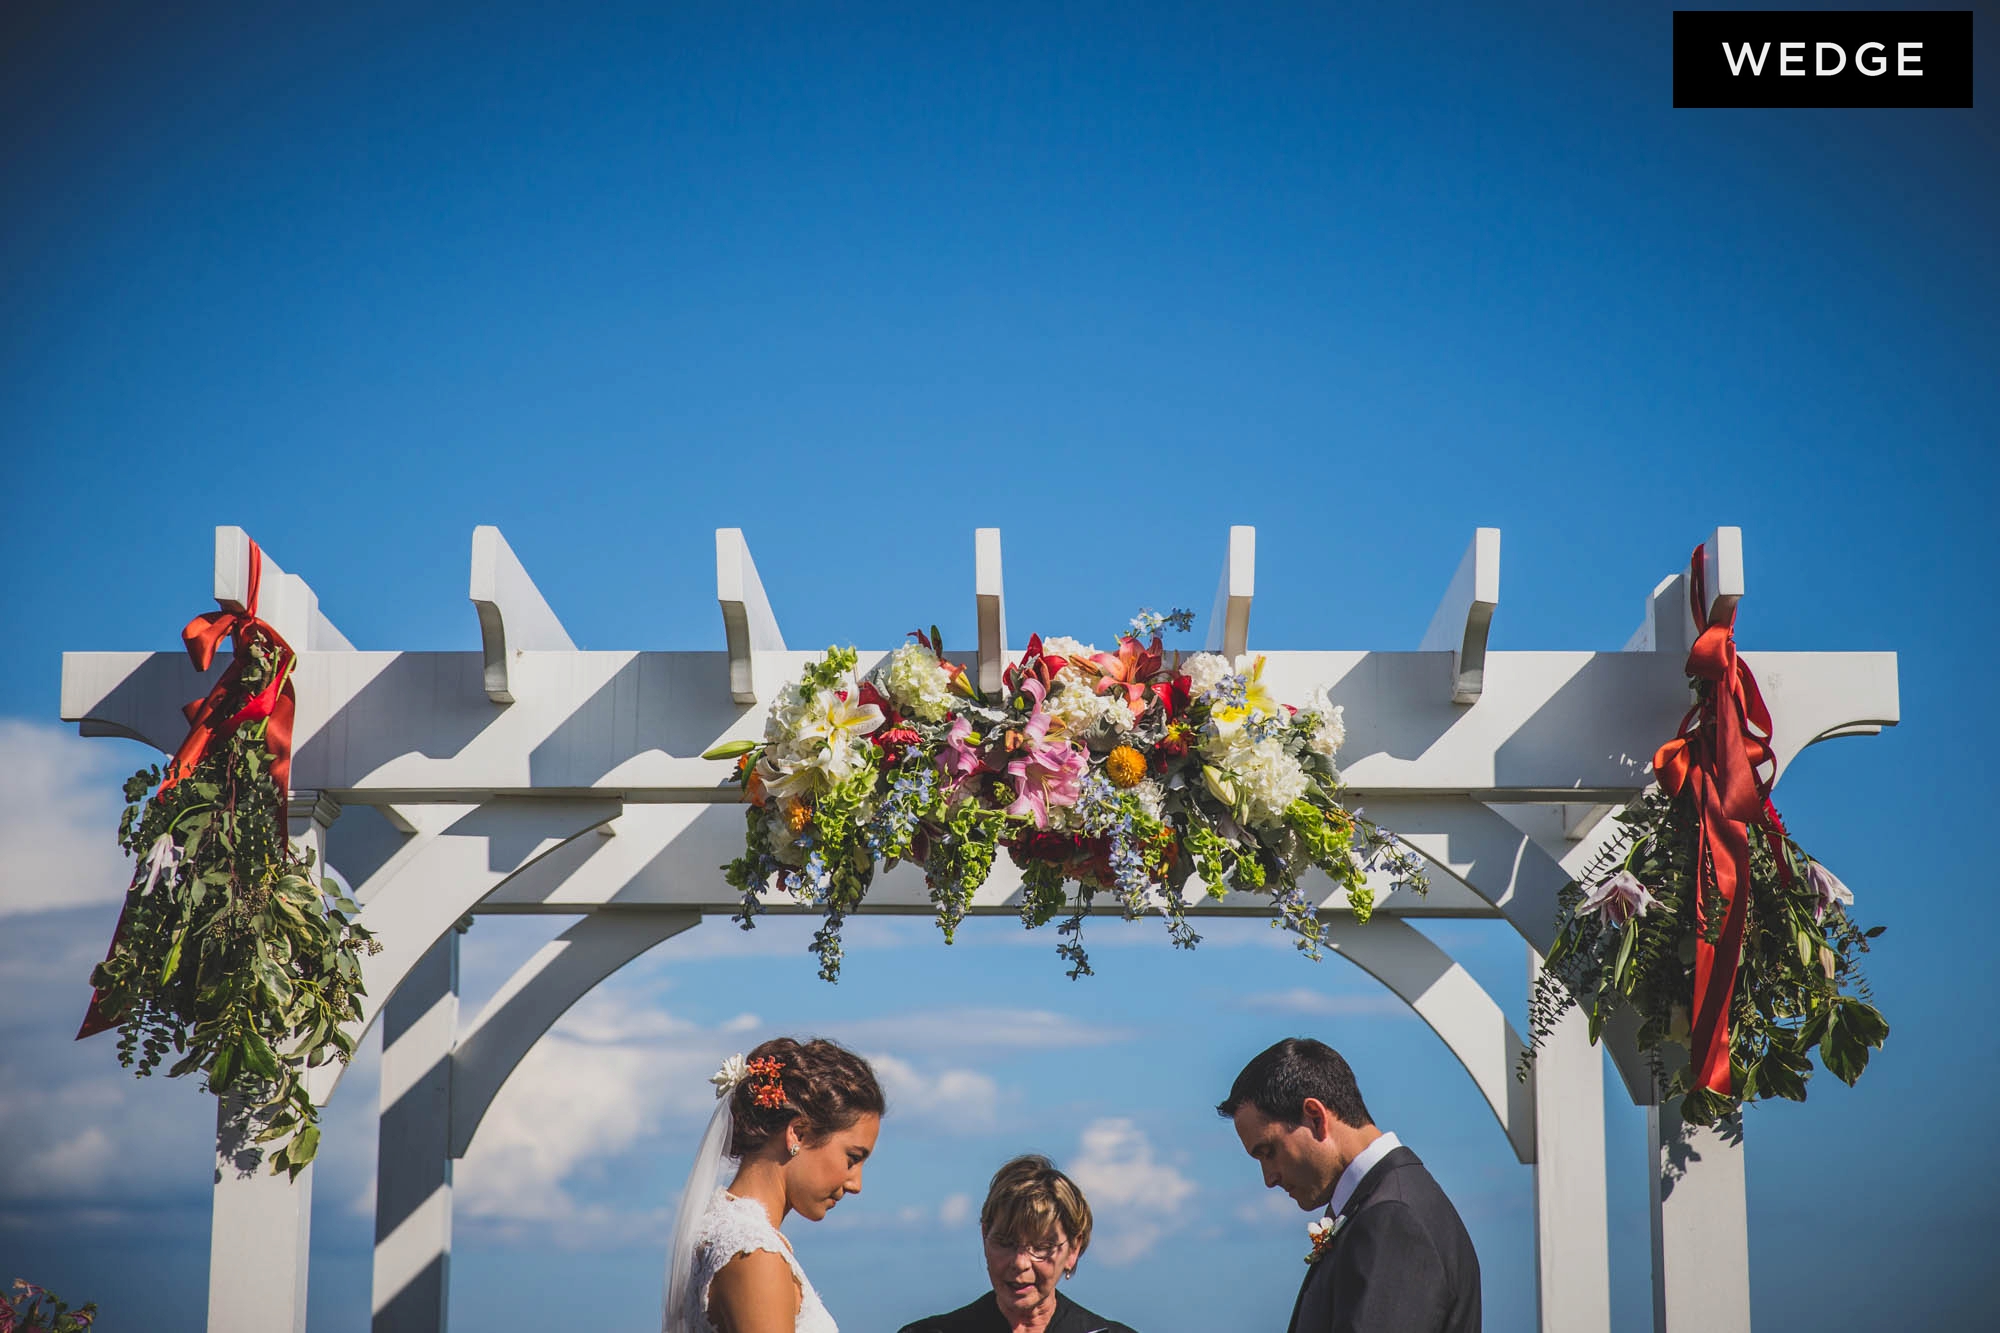 Point Lookout Wedding Sneak Peek: Jenny & Monte (Lincolnville, Maine). A wedding ceremony & reception at Point Lookout Resort in Lincolnville, Maine. Photographs by The award winning photographers at Boathouse Studios.